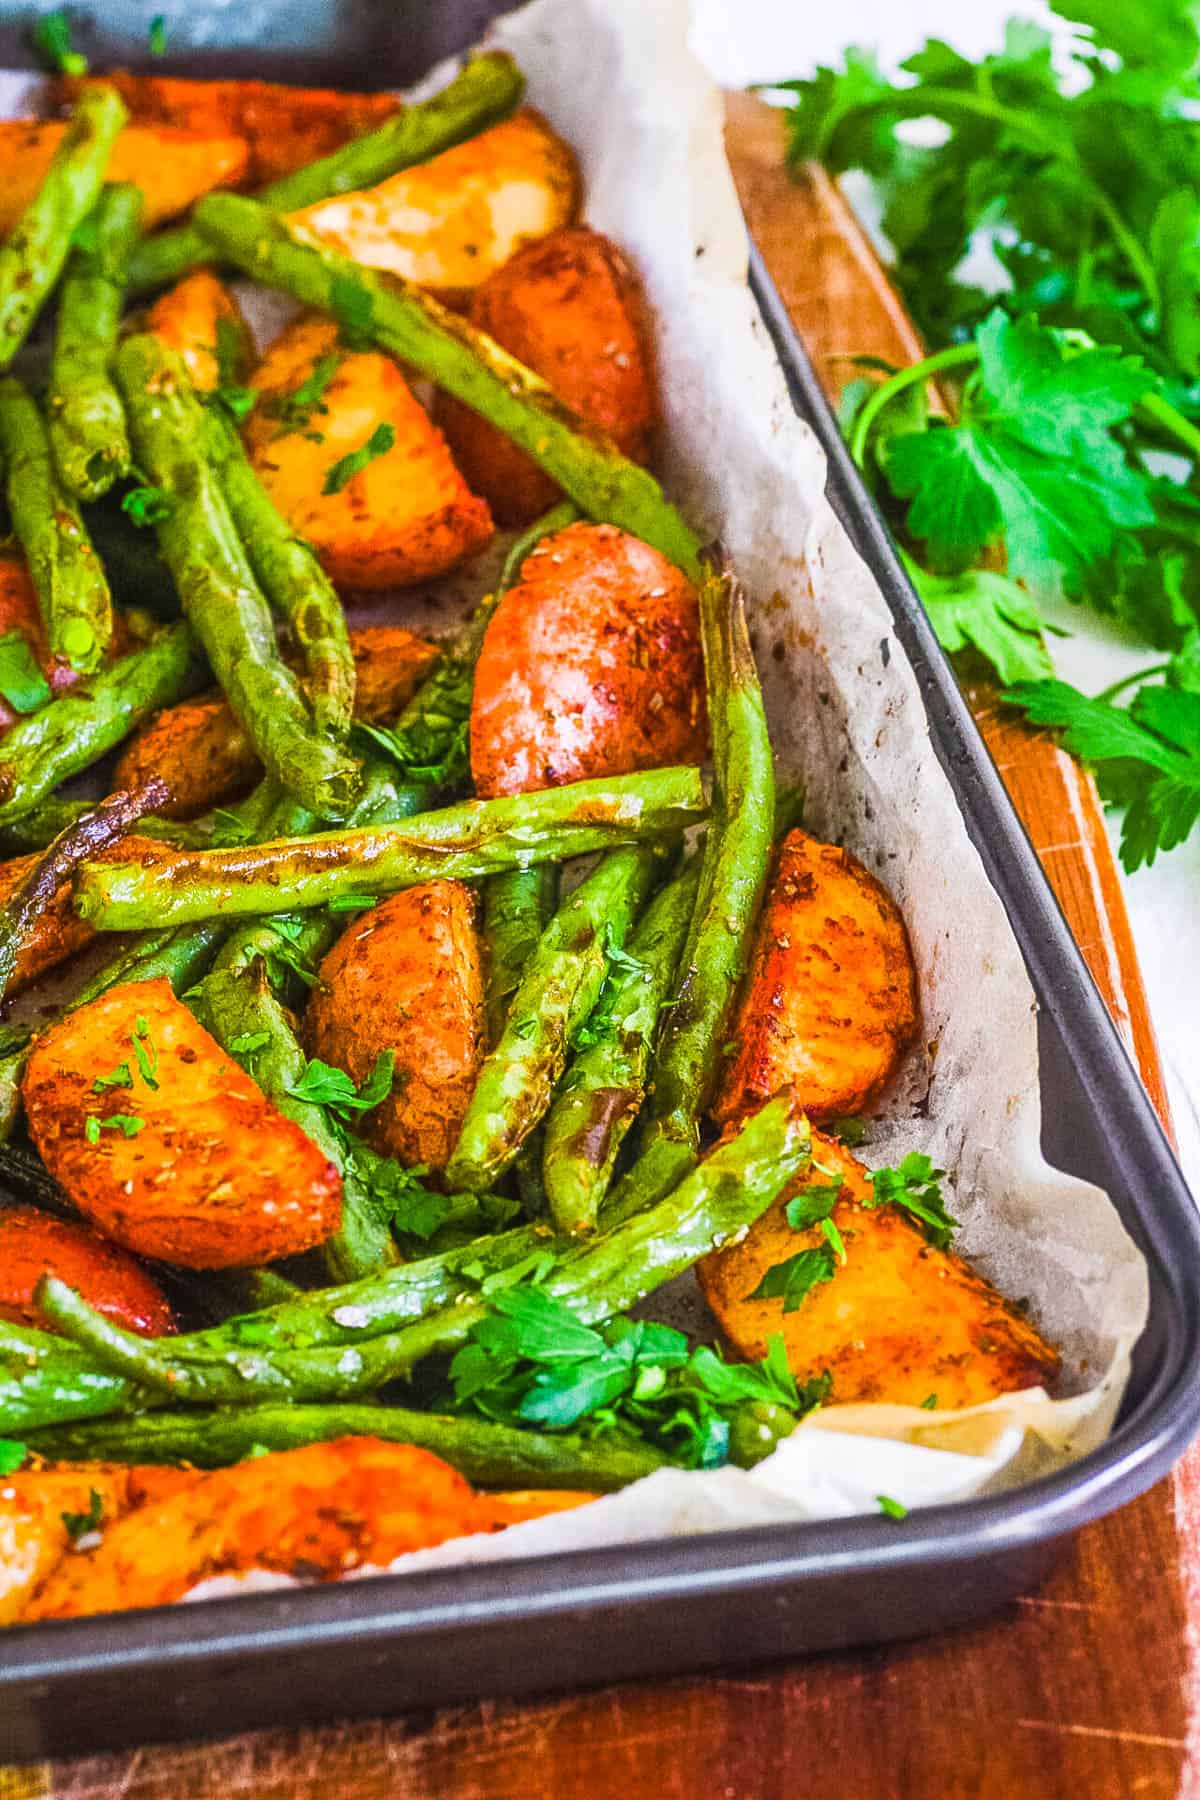 Oven roasted green beans and potatoes on a sheet pan.